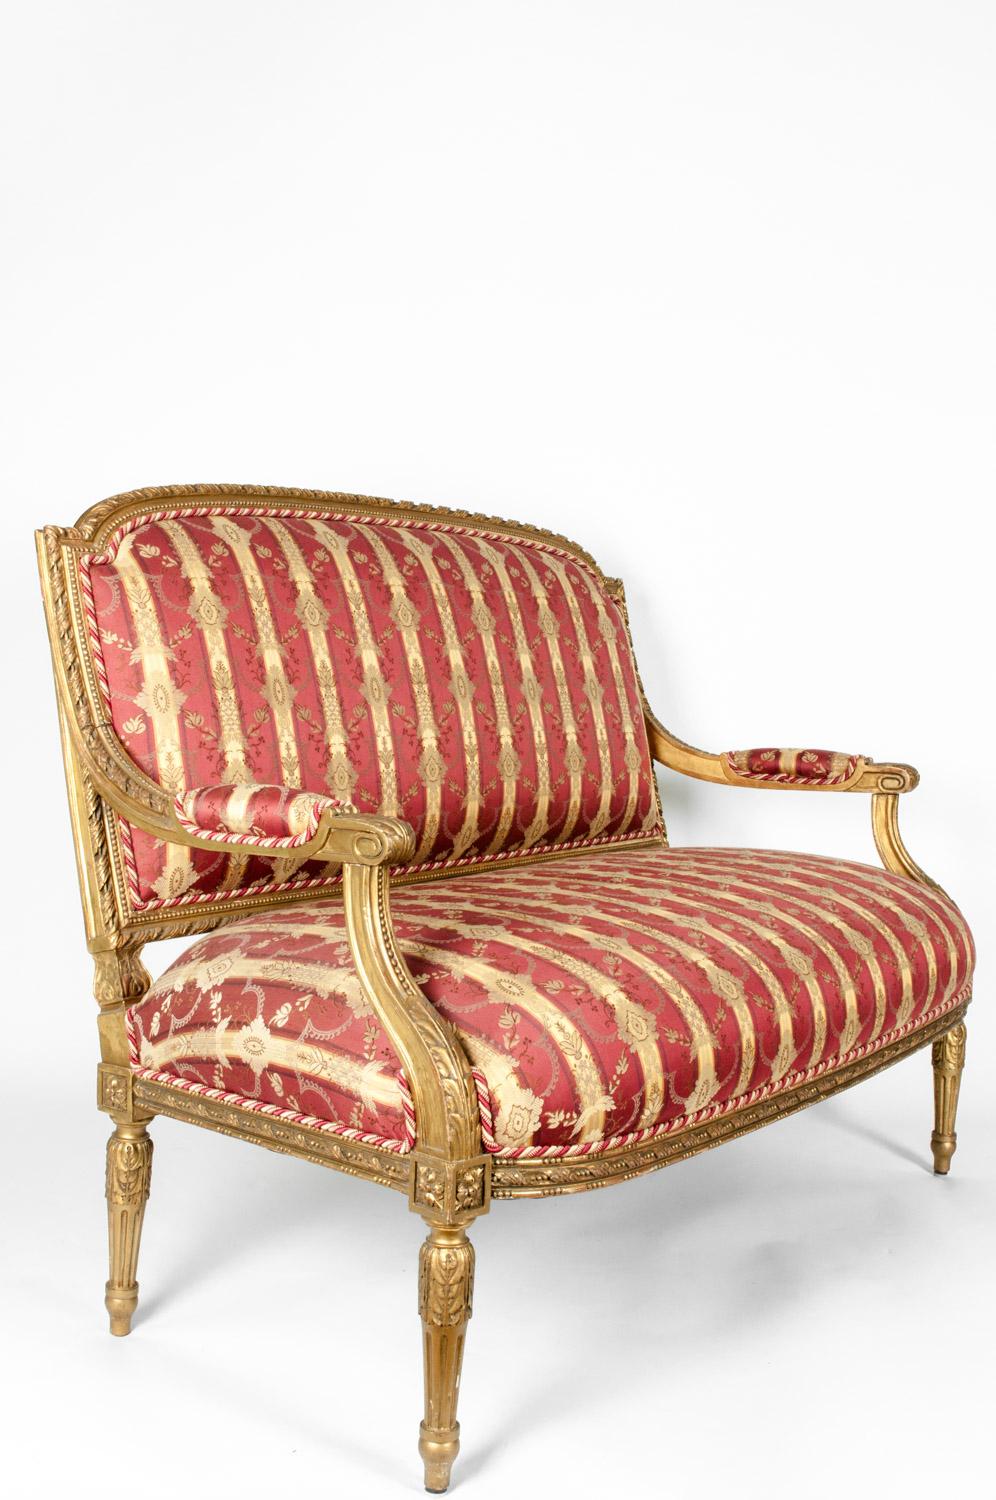 Early 19th Century Louis XVI Style Giltwood Settee 3